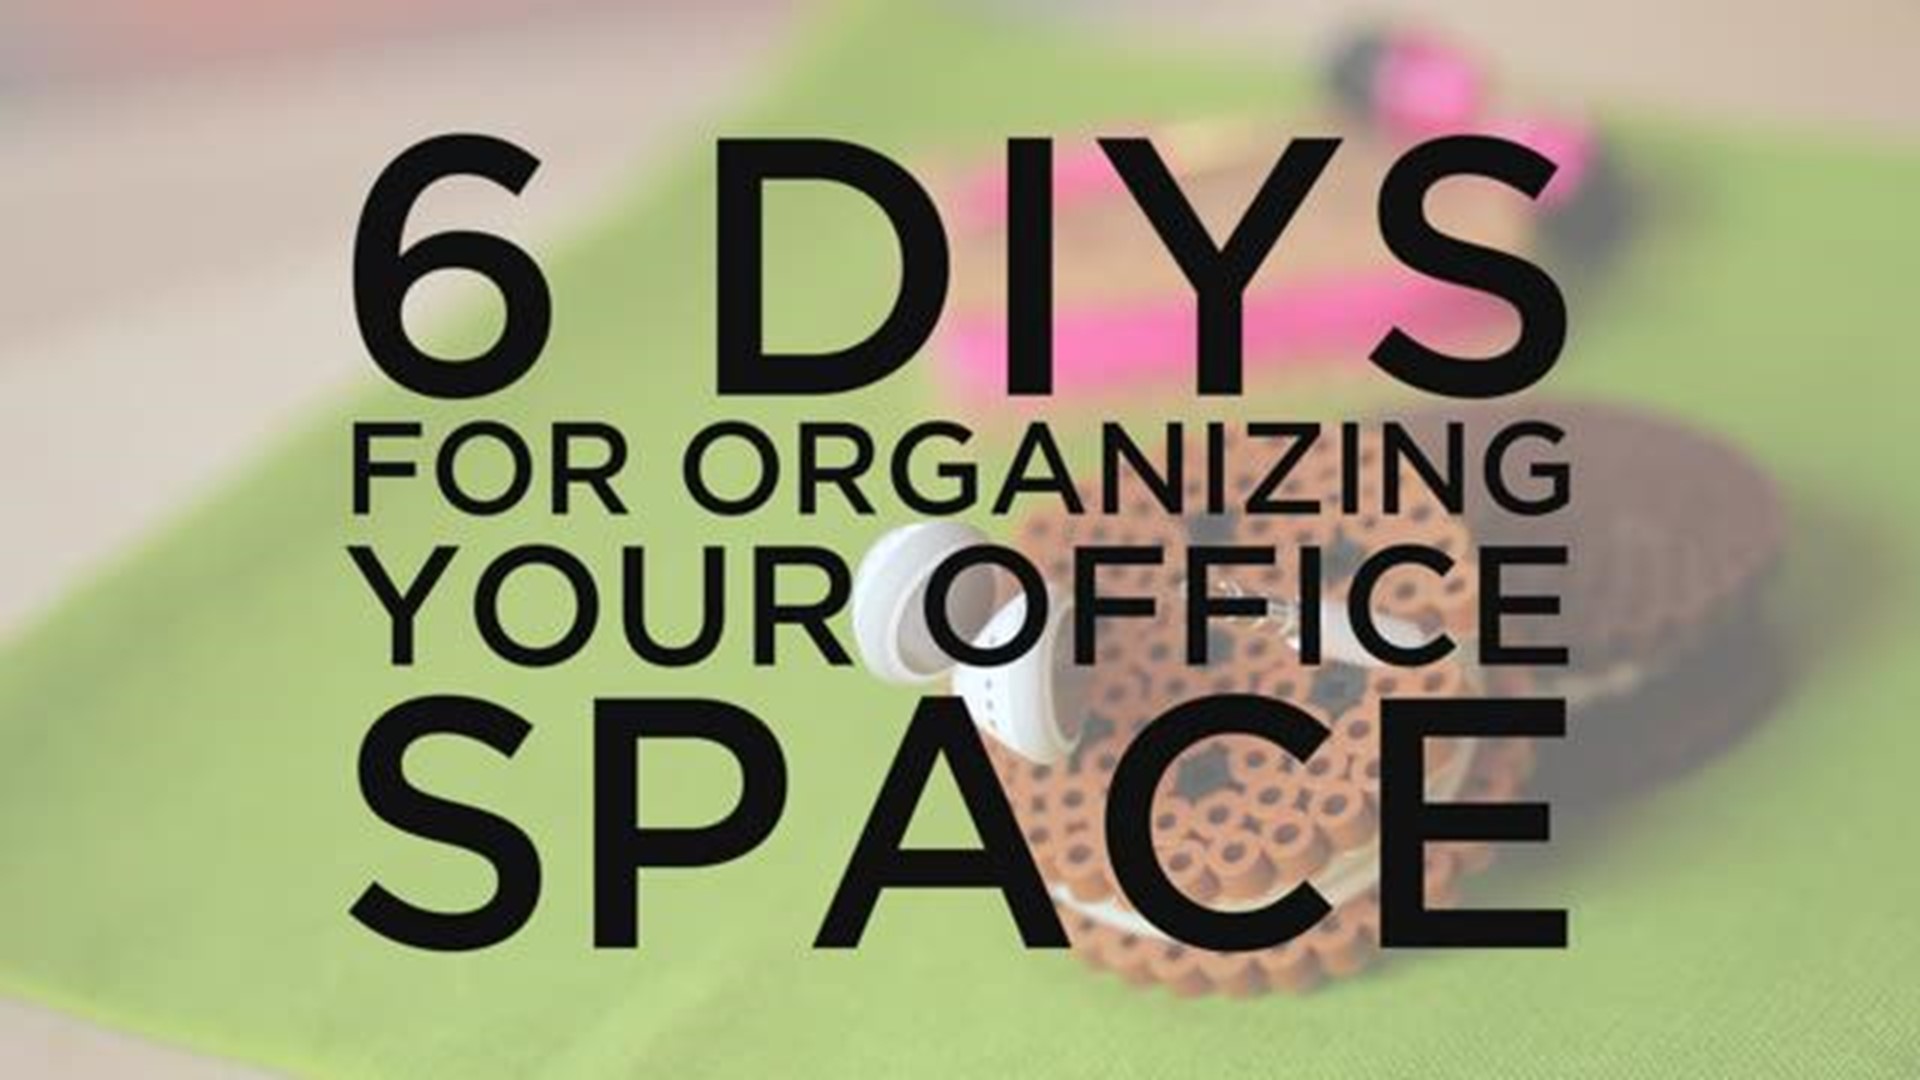 Hack your office organization needs with these 6 ideas!